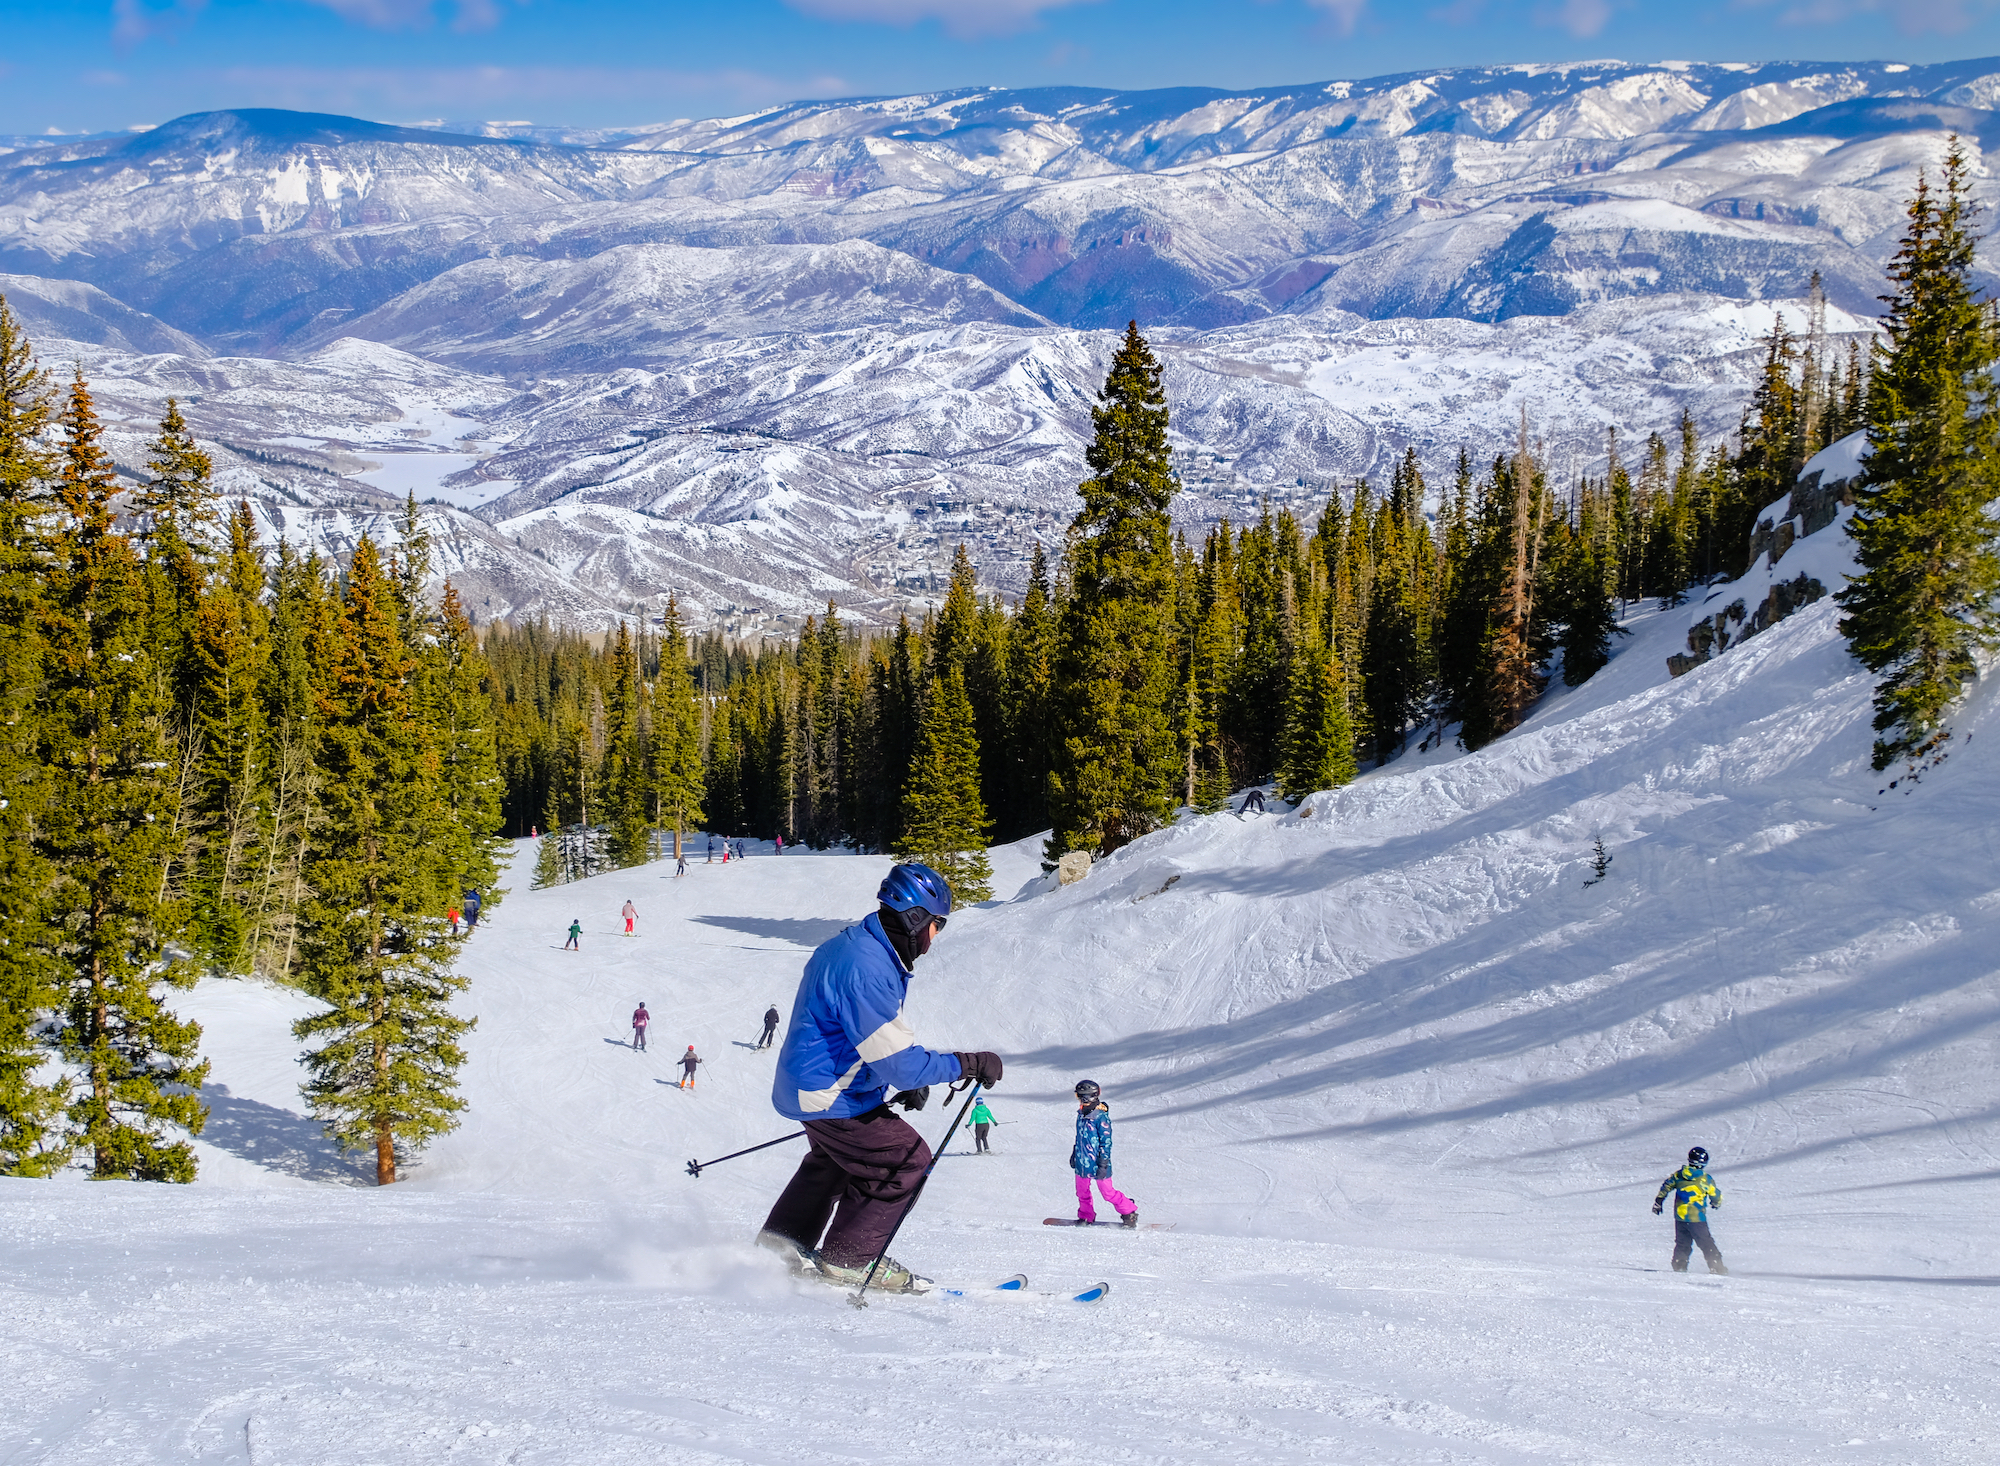 The Most Searched-For Ski Resorts Worldwide: US Resort Claims Second Place